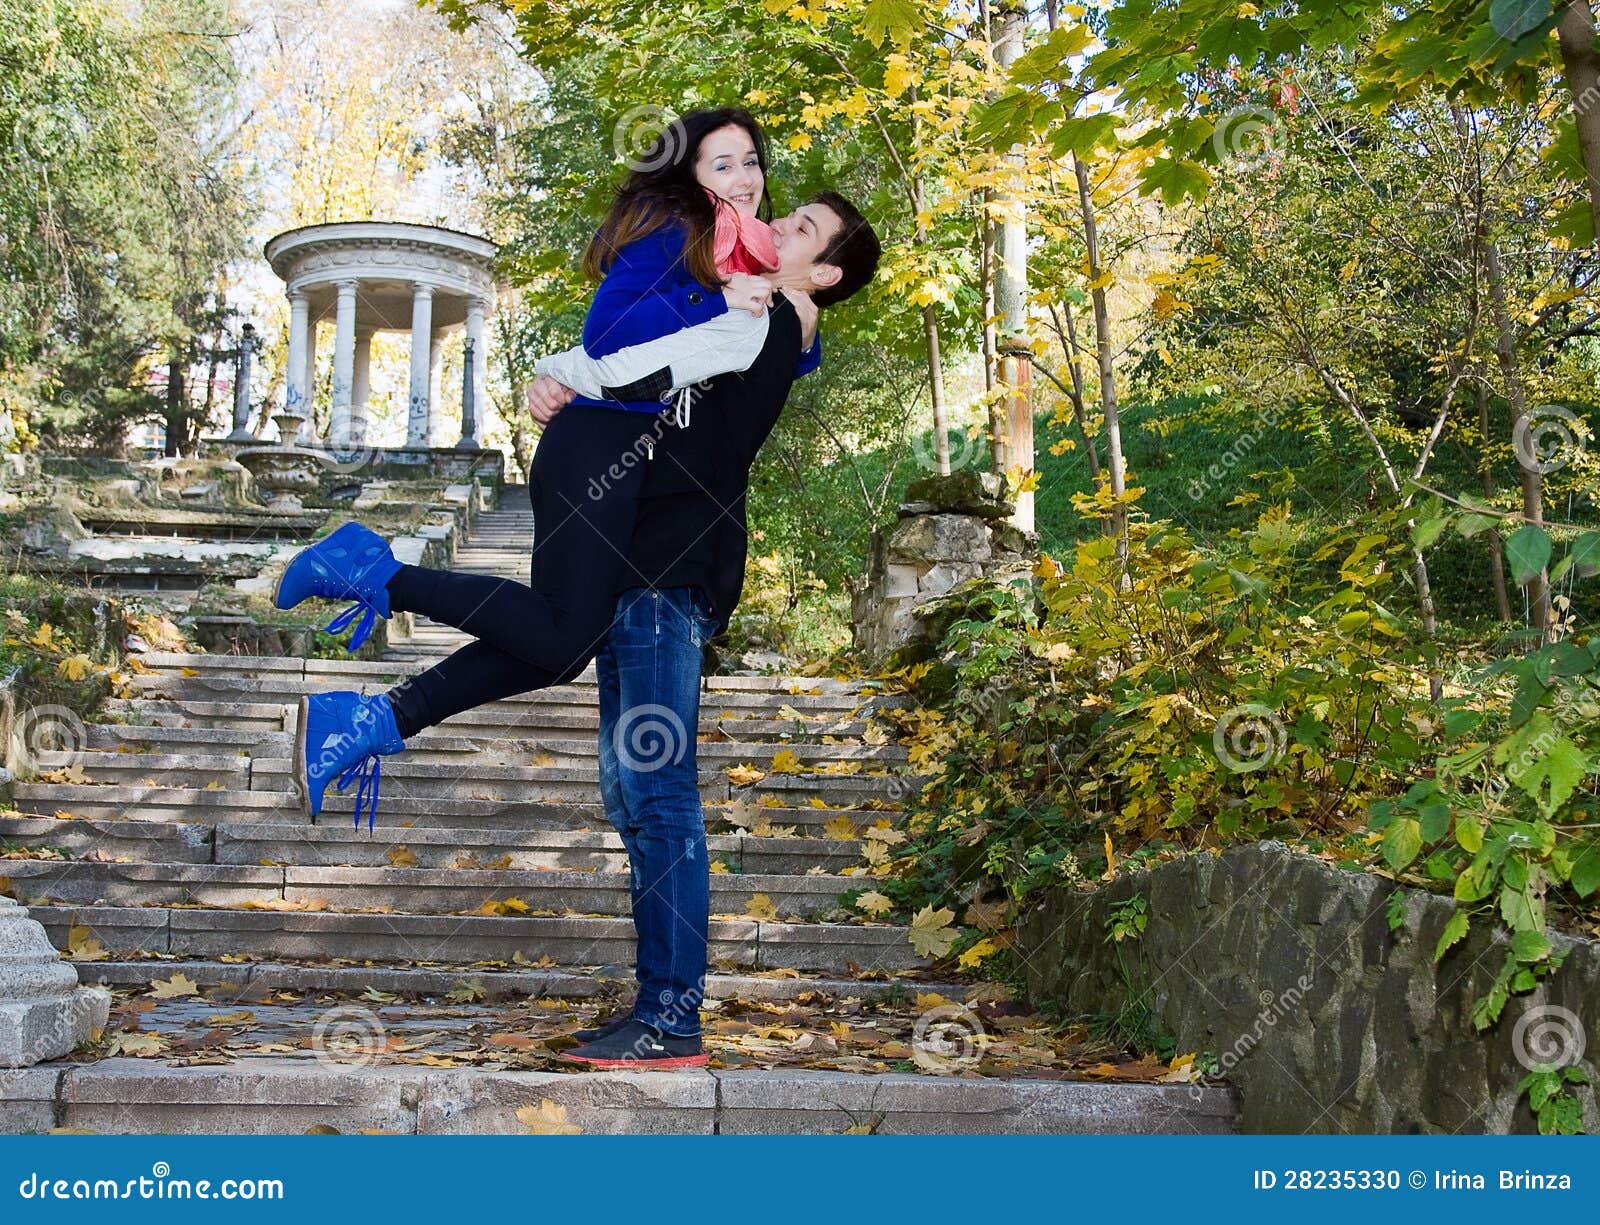 Embracing Couple Being Together In Nature Stock Photo - Image of